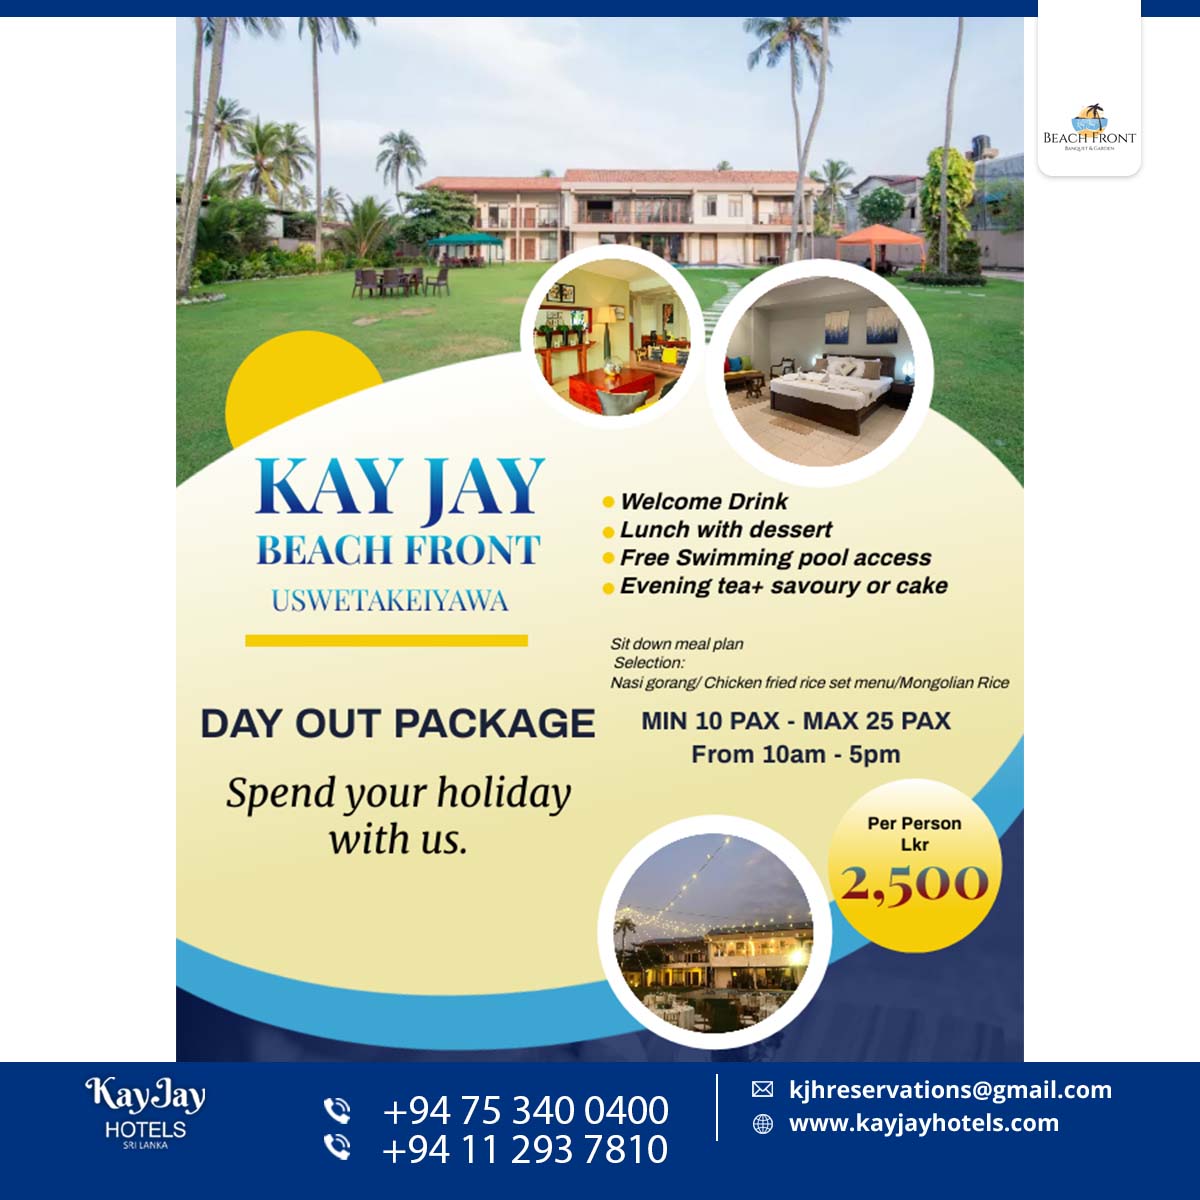 Day out package